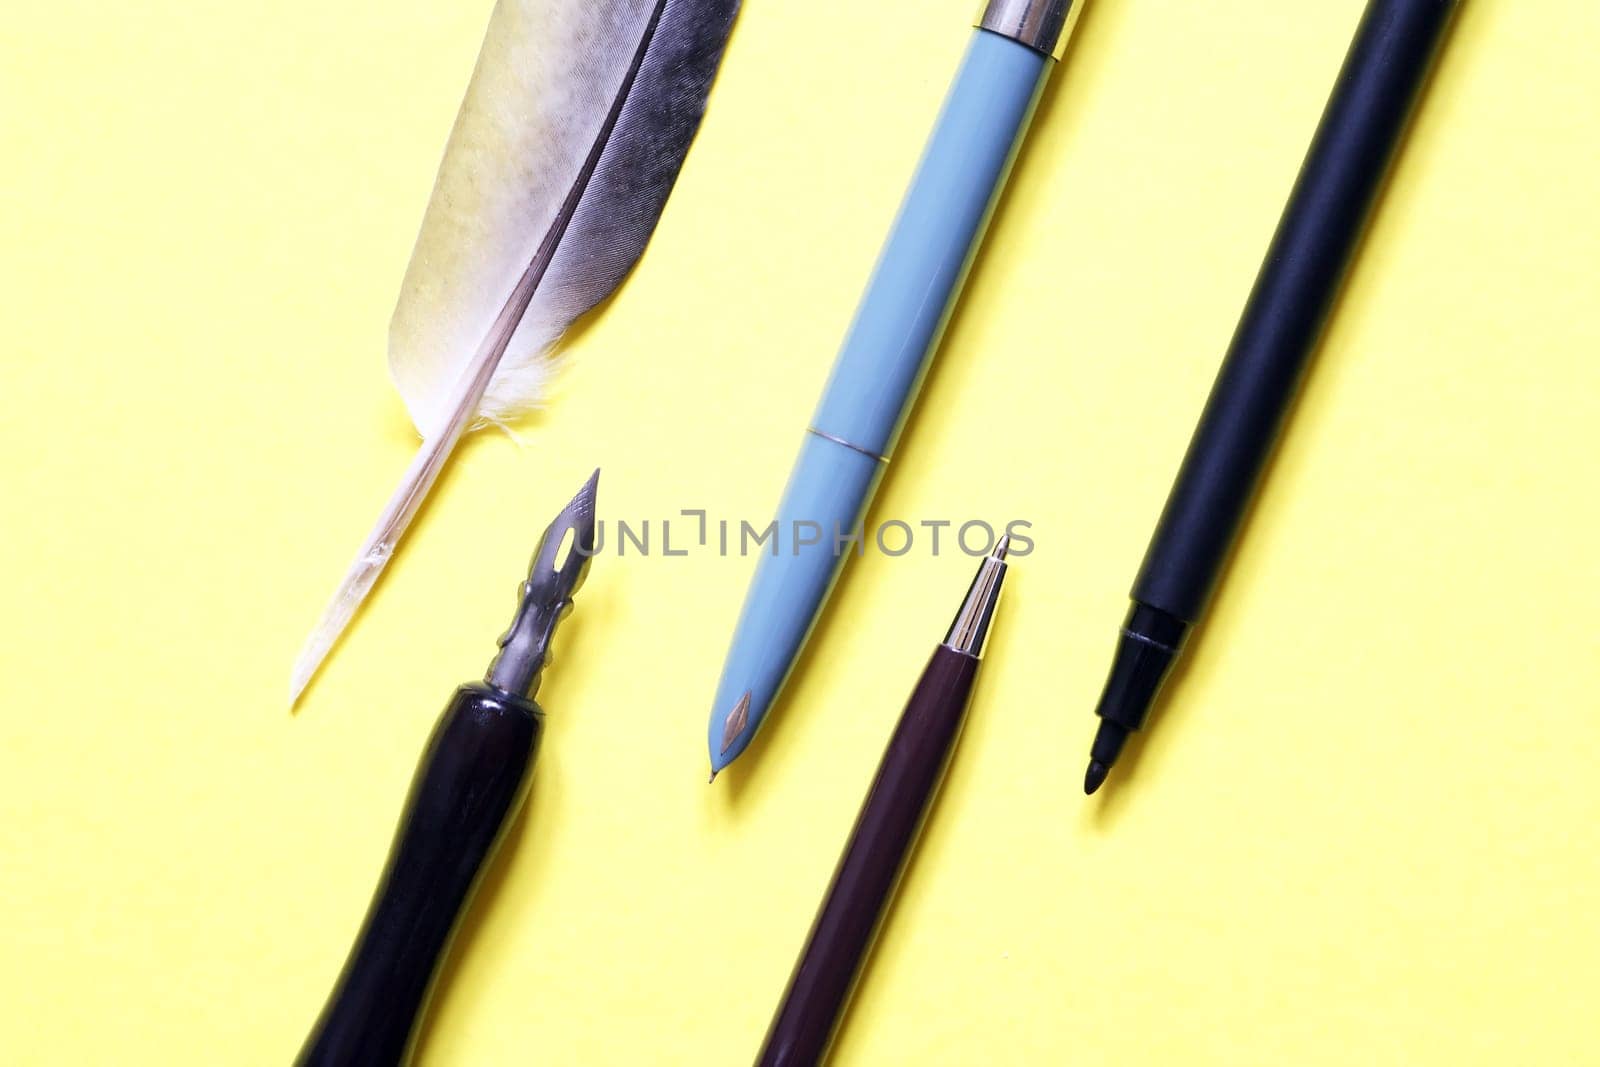 The development of the fountain pen. Set of various pens closeup on yellow paper background